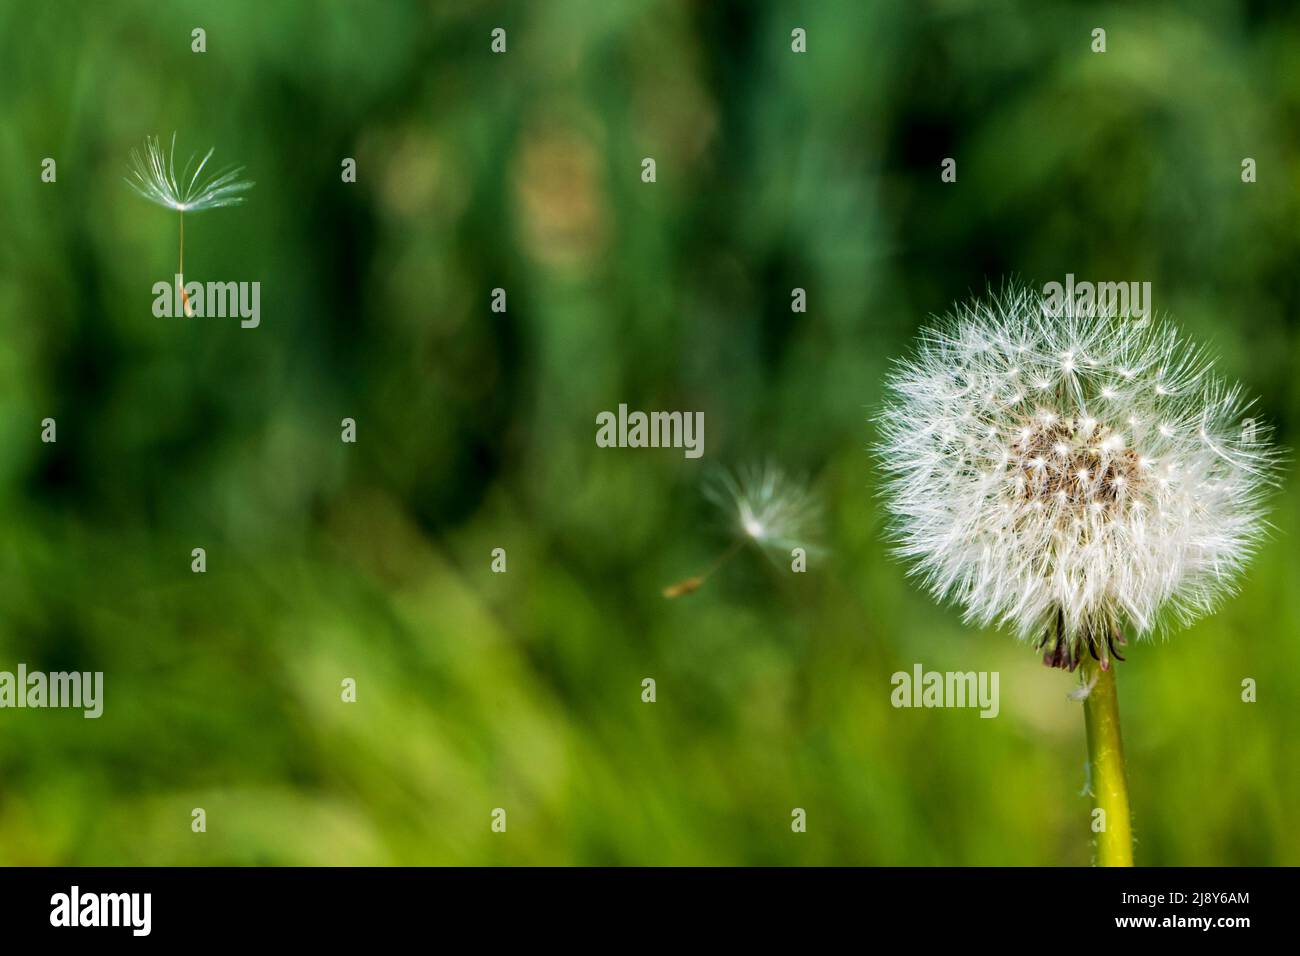 Dandelion against a blurred, green background with two flying parachutes Stock Photo